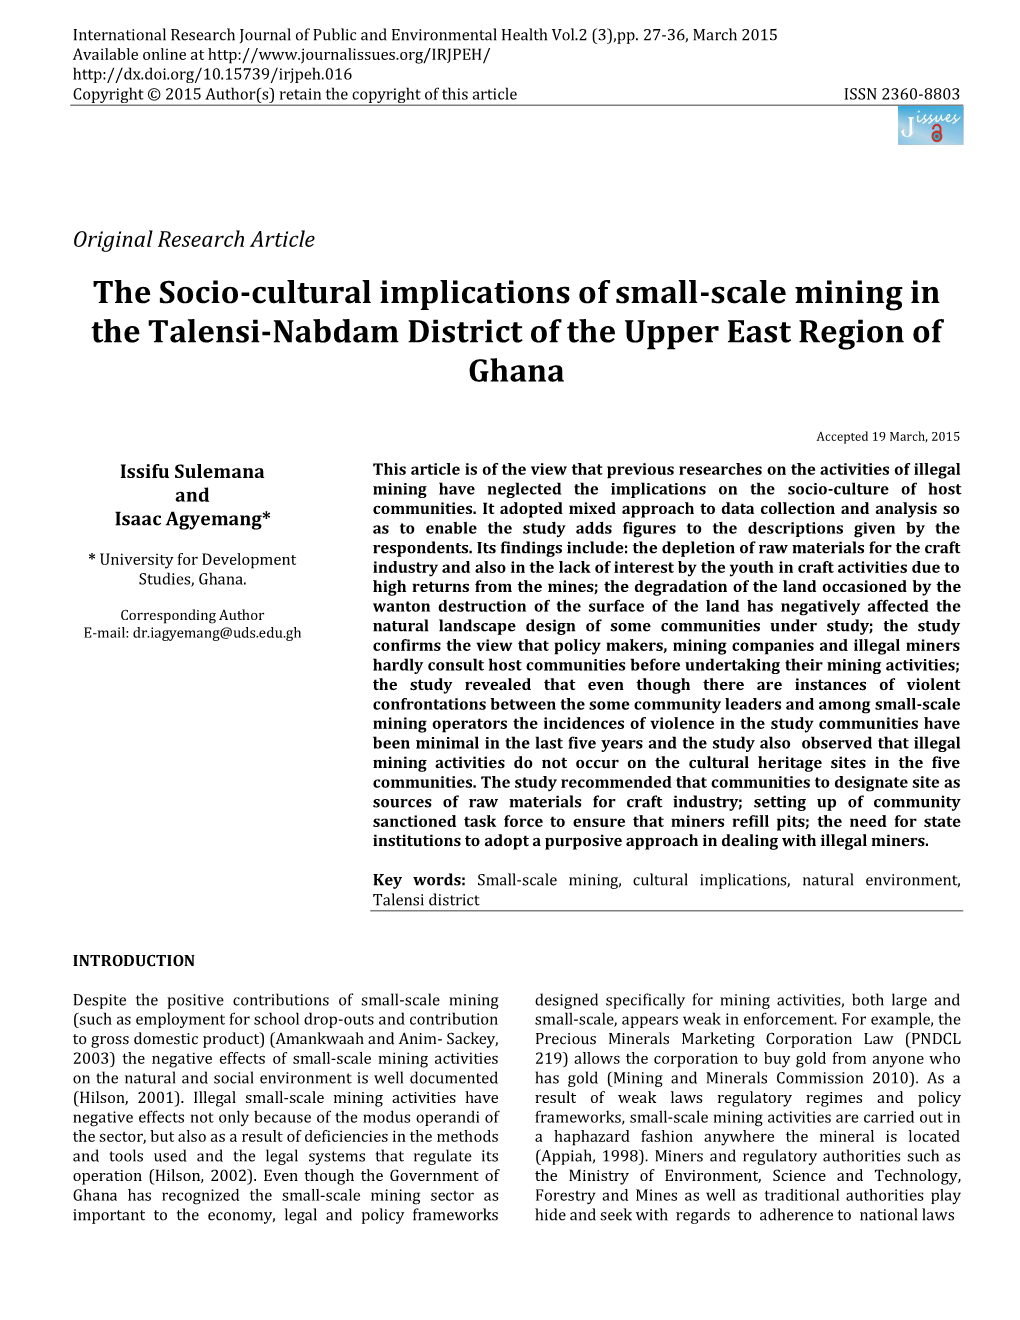 The Socio-Cultural Implications of Small-Scale Mining in the Talensi-Nabdam District of the Upper East Region of Ghana